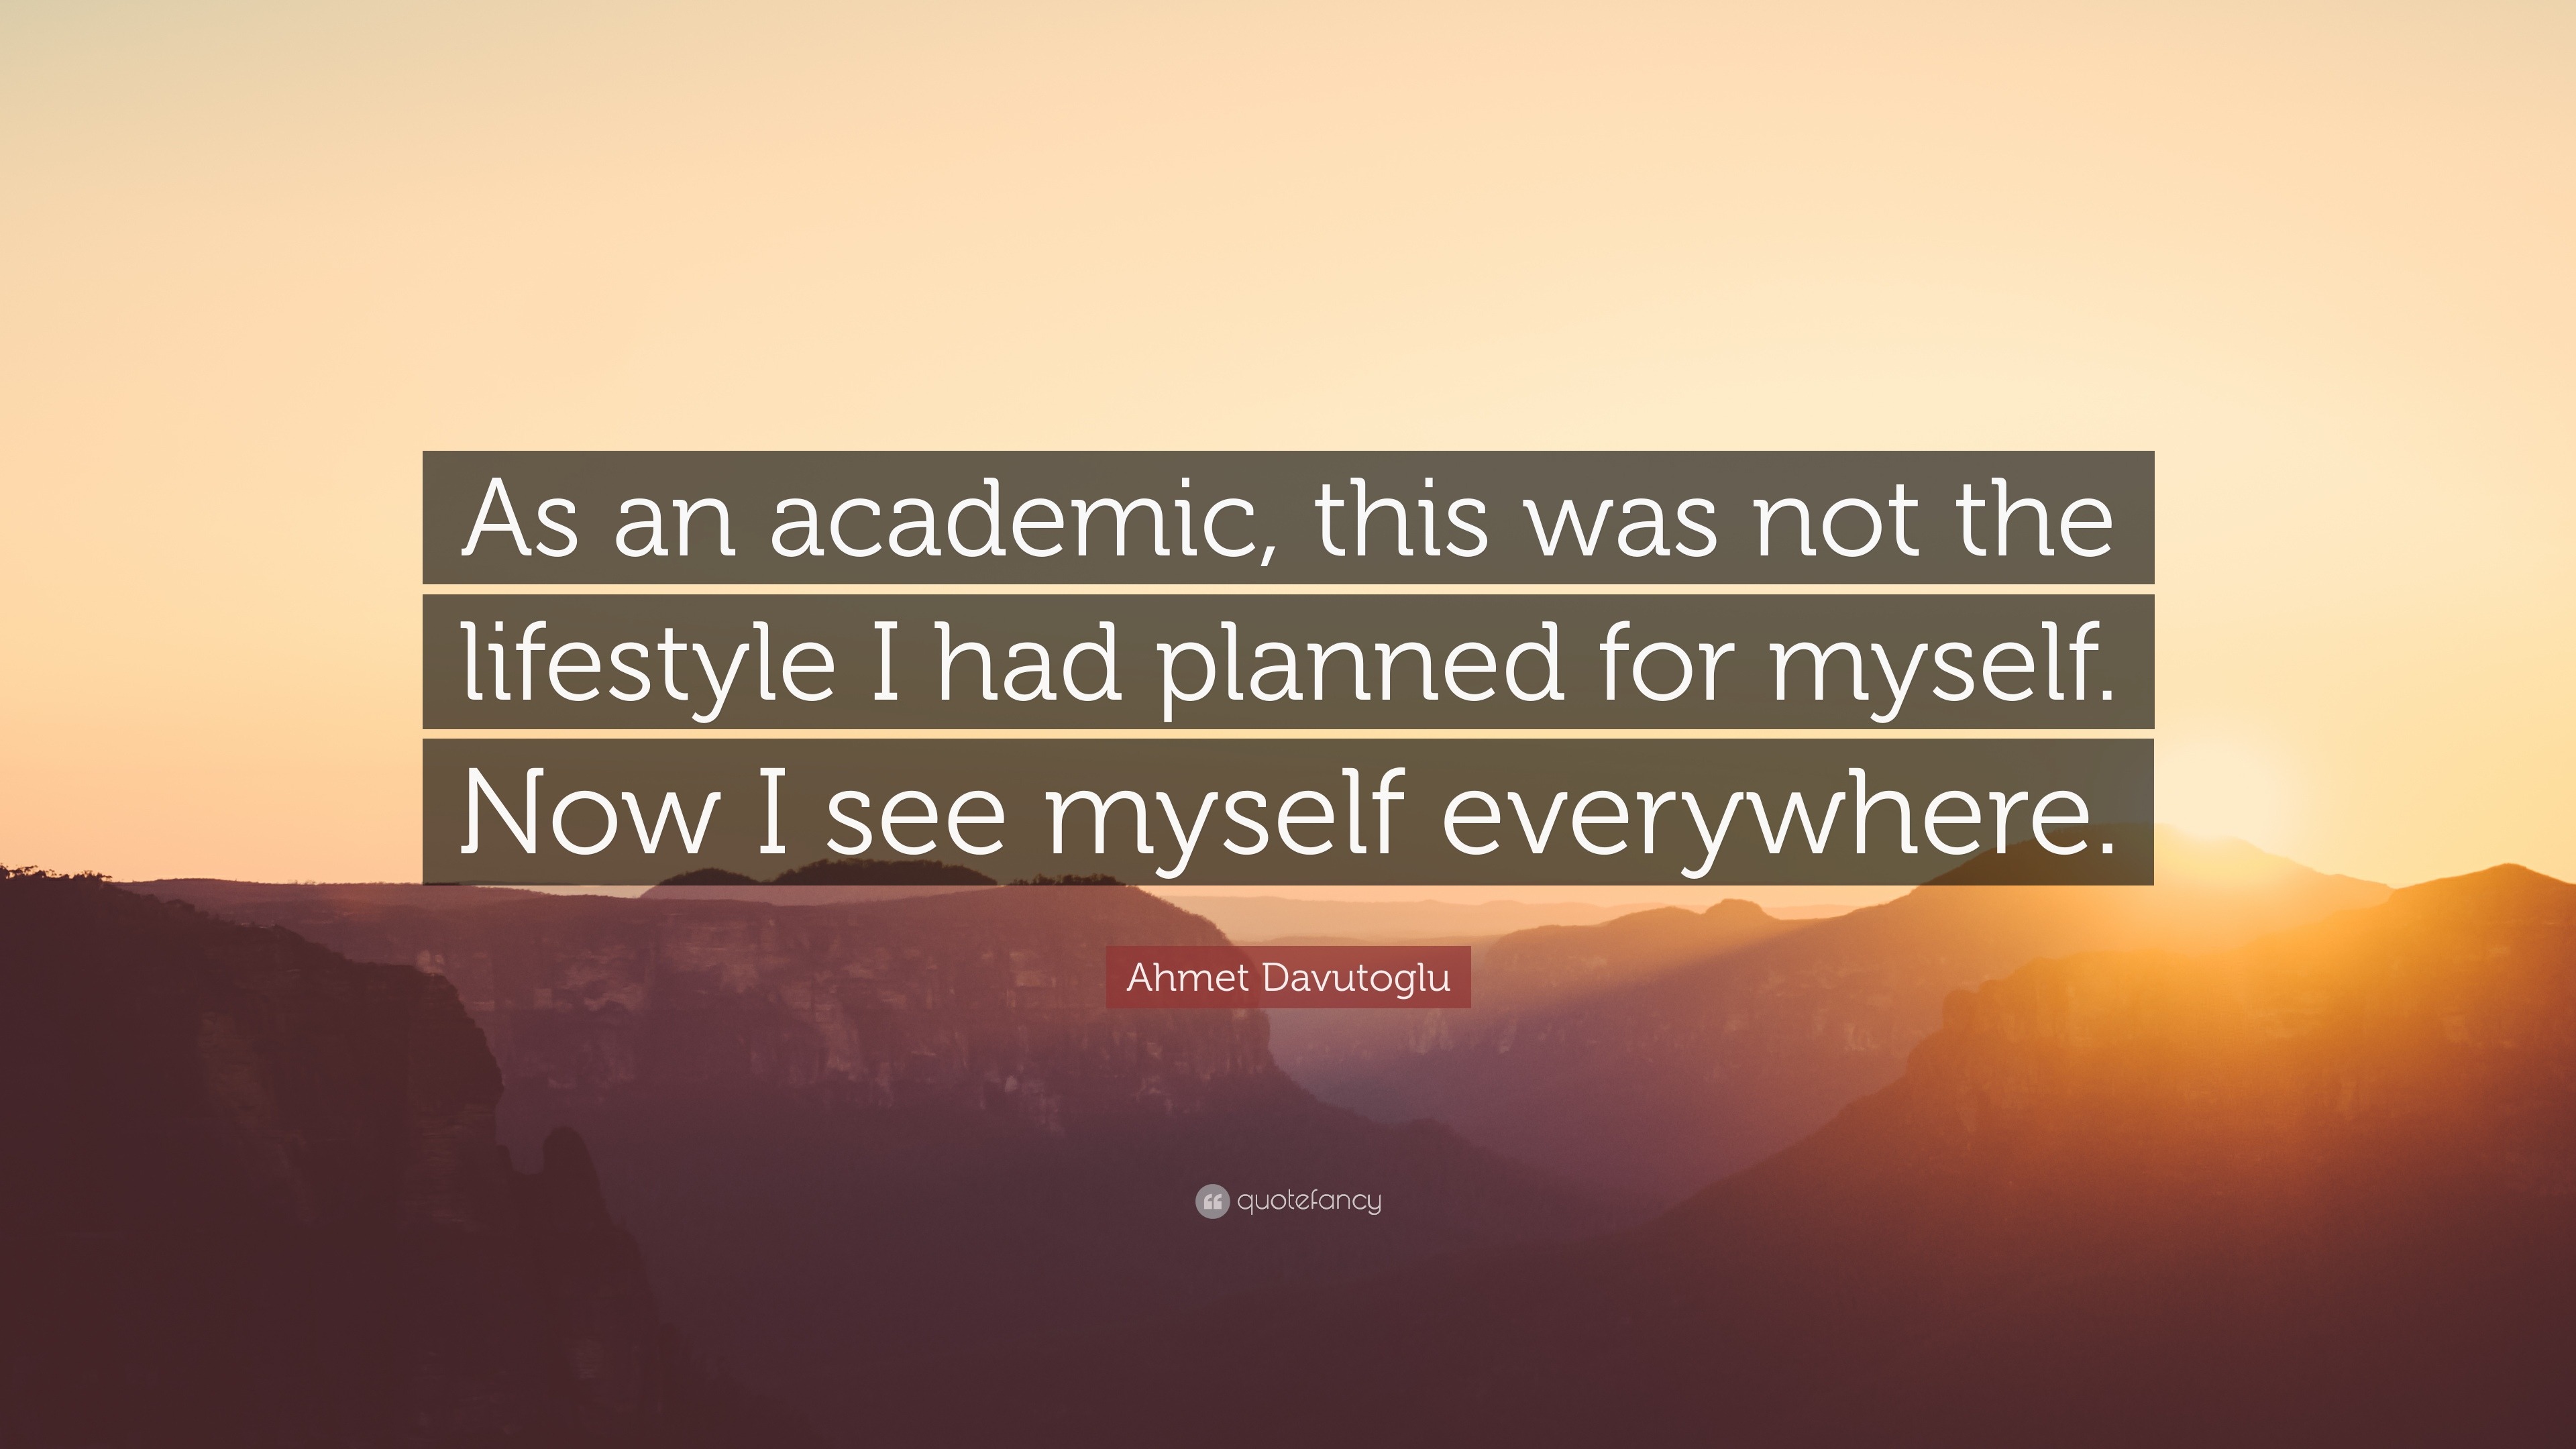 Ahmet Davutoglu Quote: “As an academic, this was not the lifestyle I ...